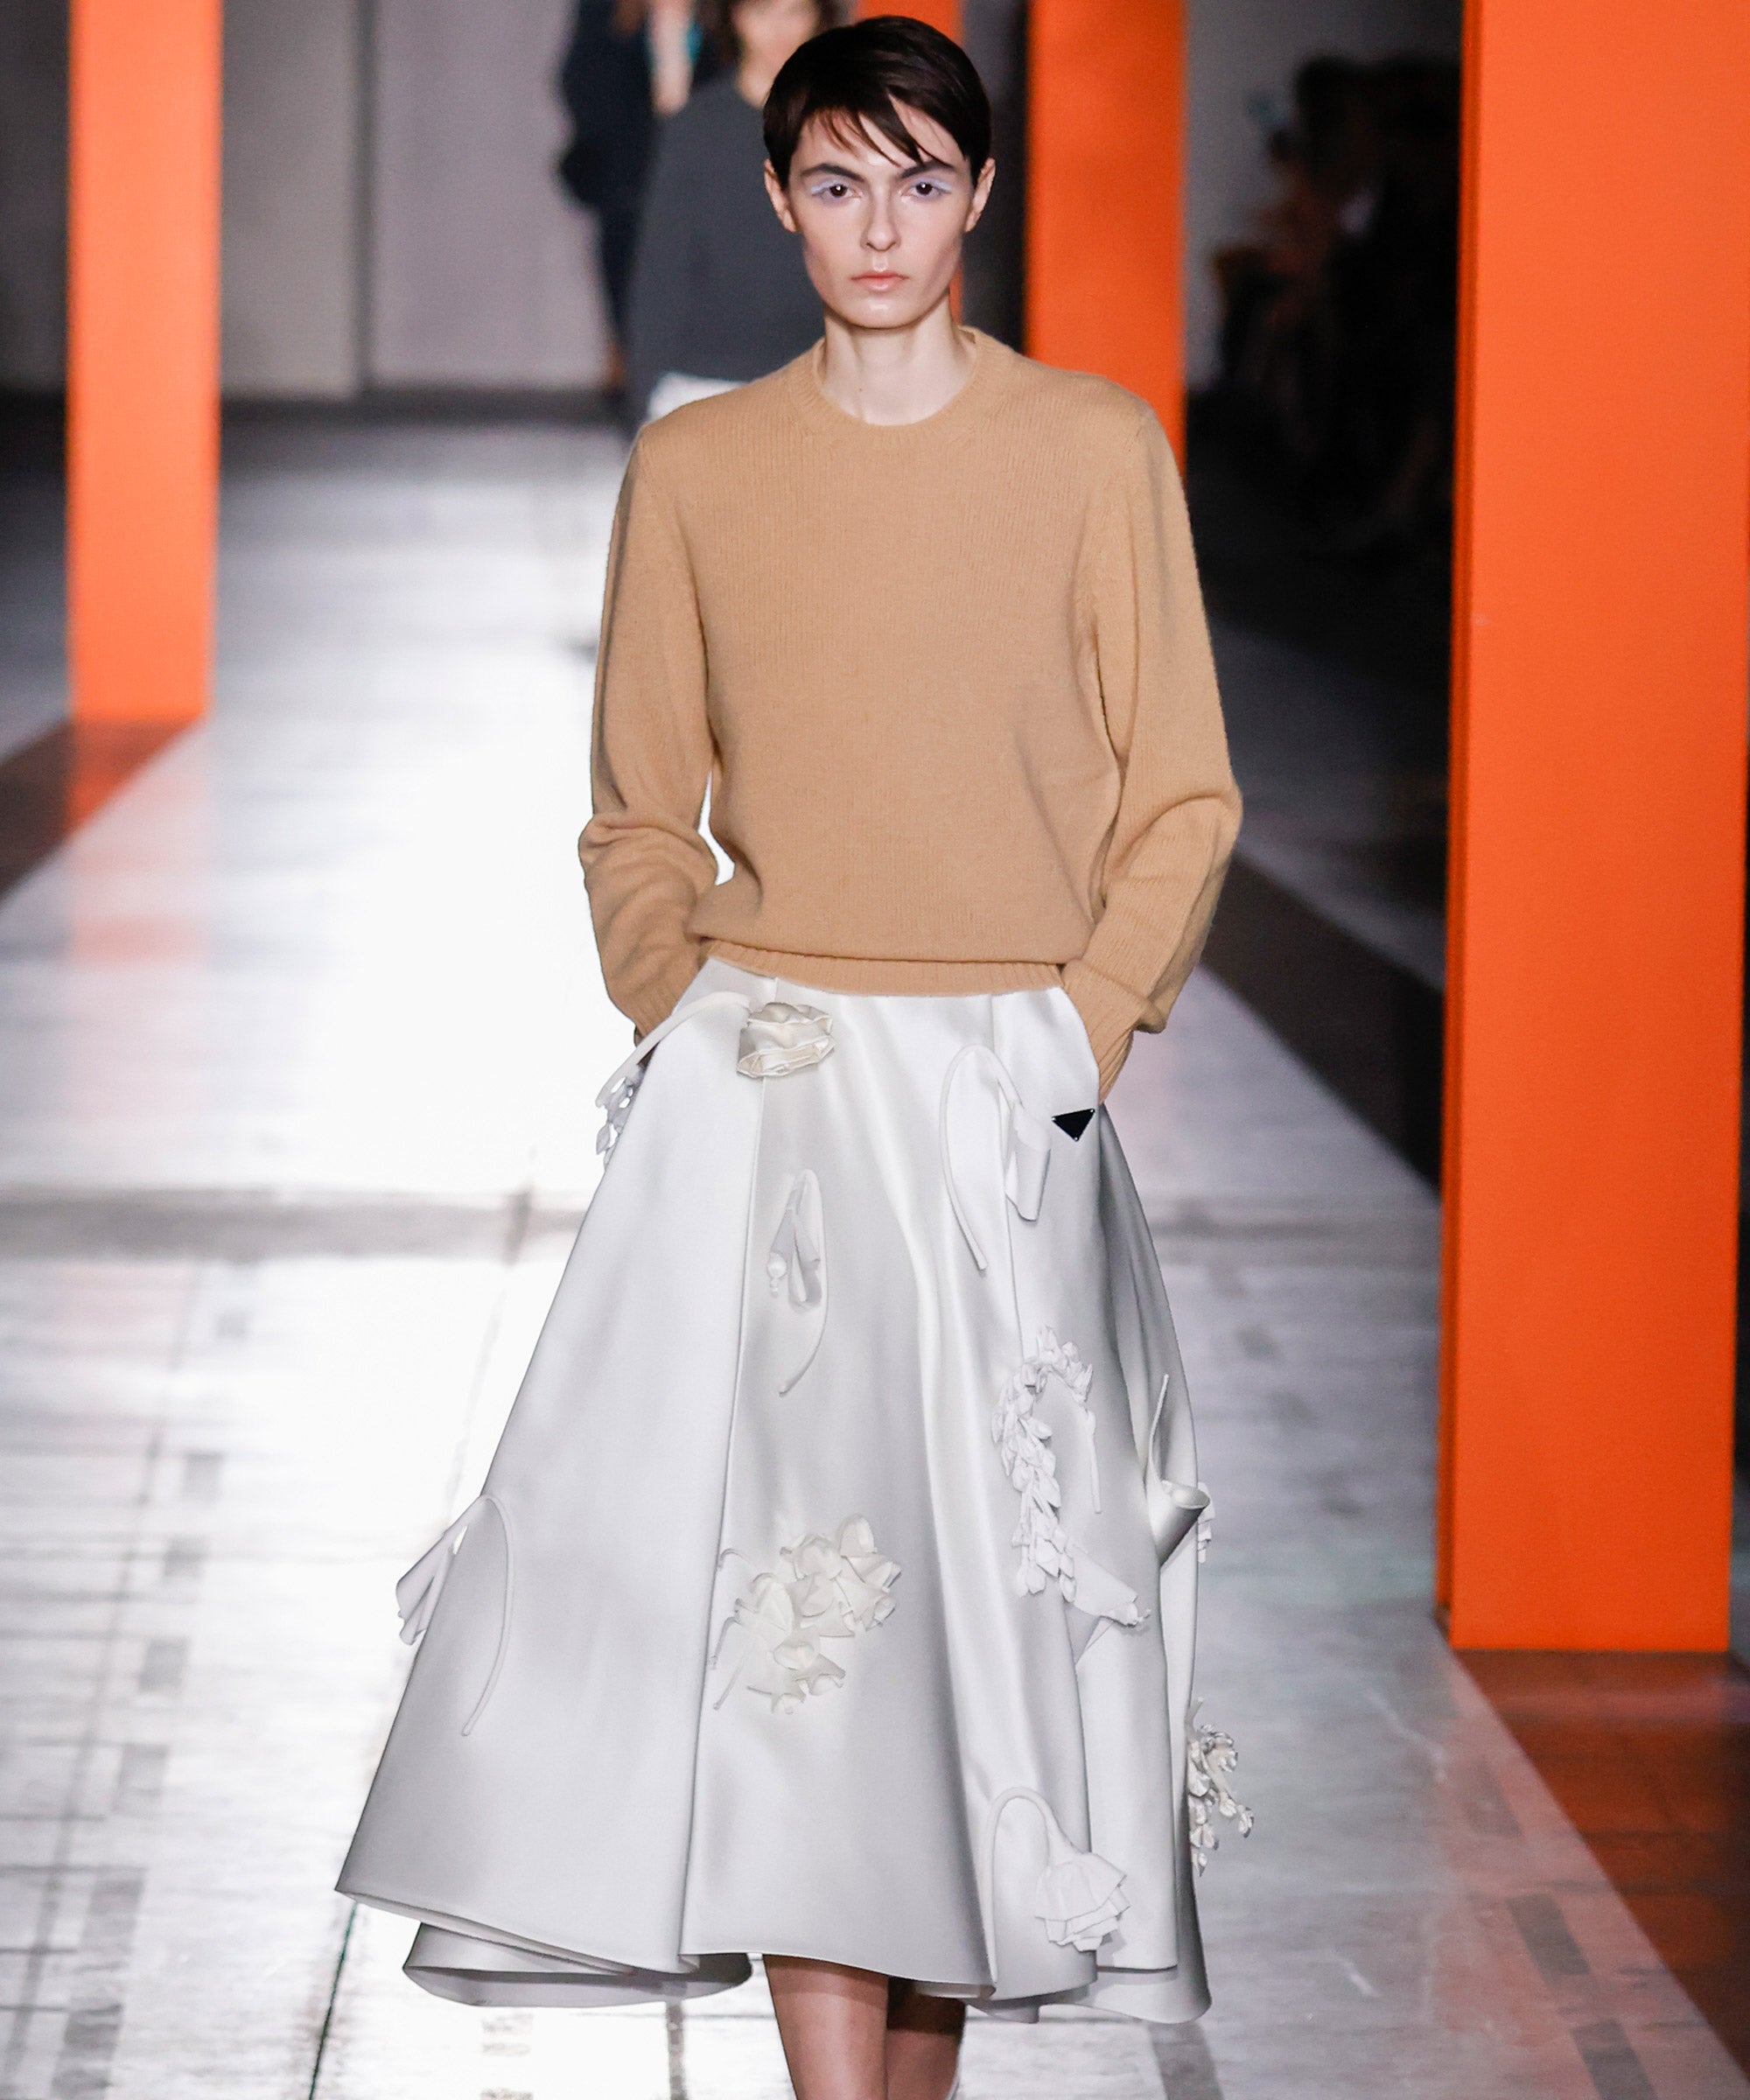 Why A White Skirt Is Fashion's Must-Have This Fall